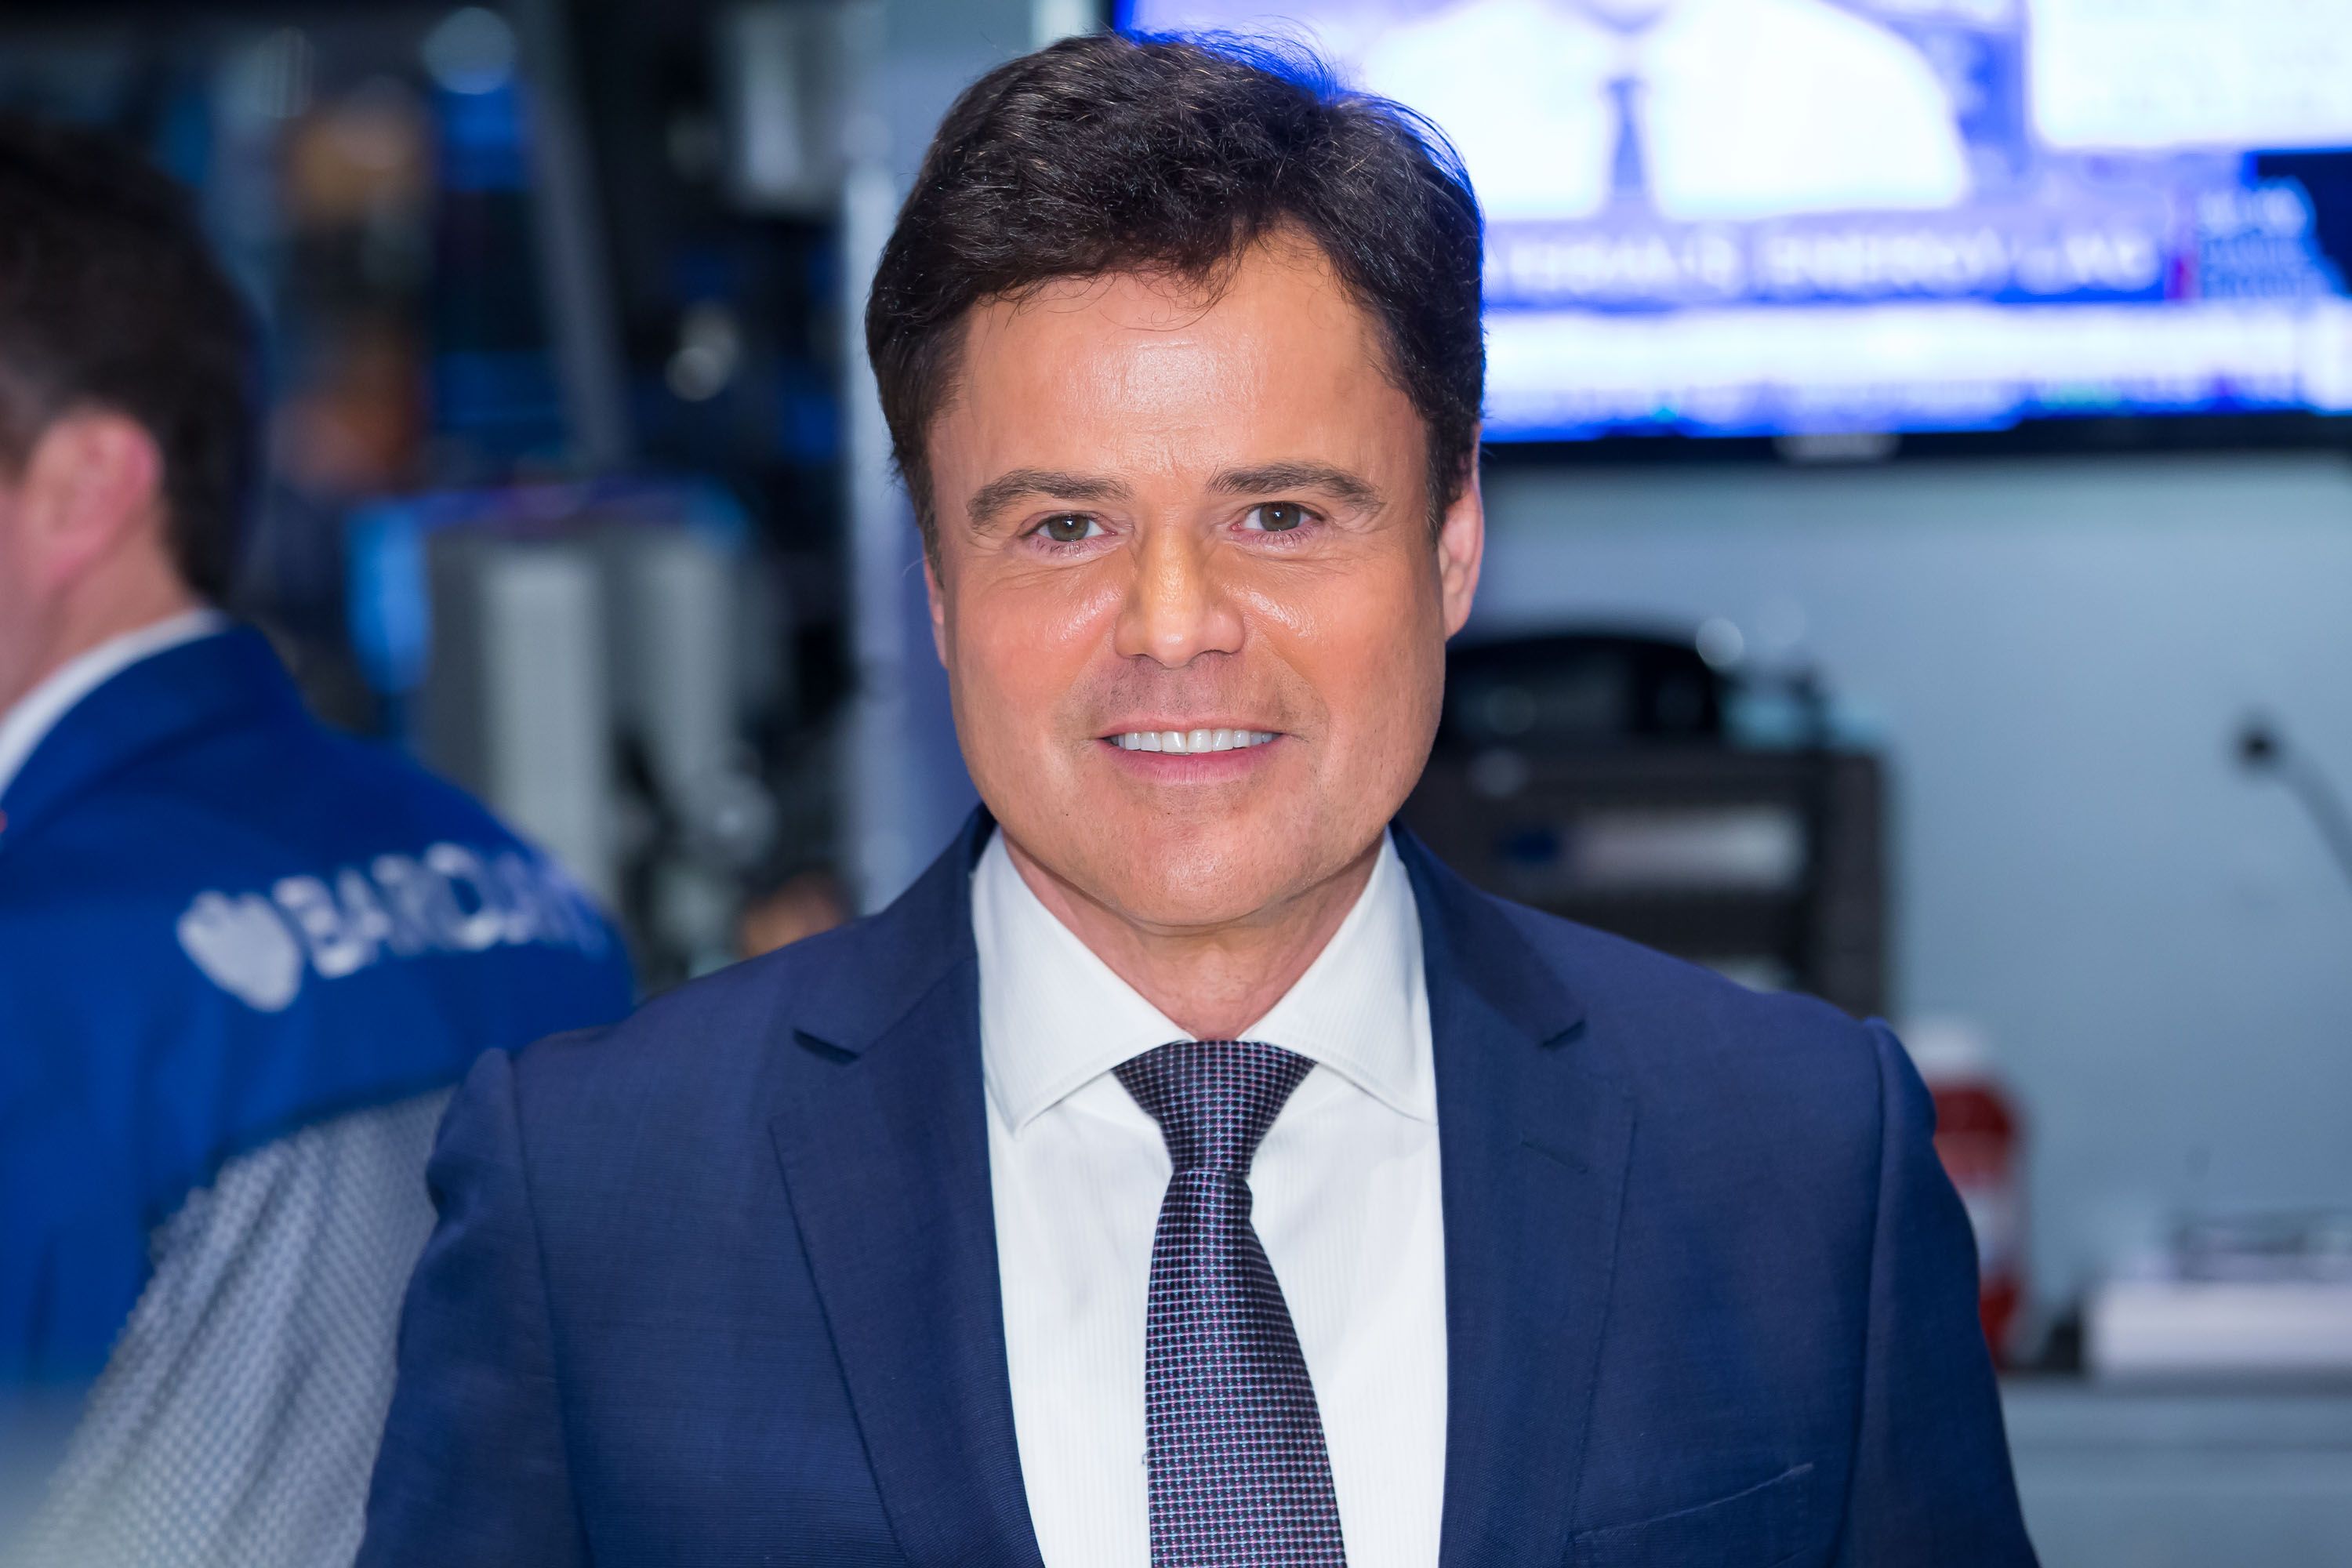 Actor Donny Osmond rings the Closing Bell at New York Stock Exchange on January 13, 2015 | Photo: Getty Images